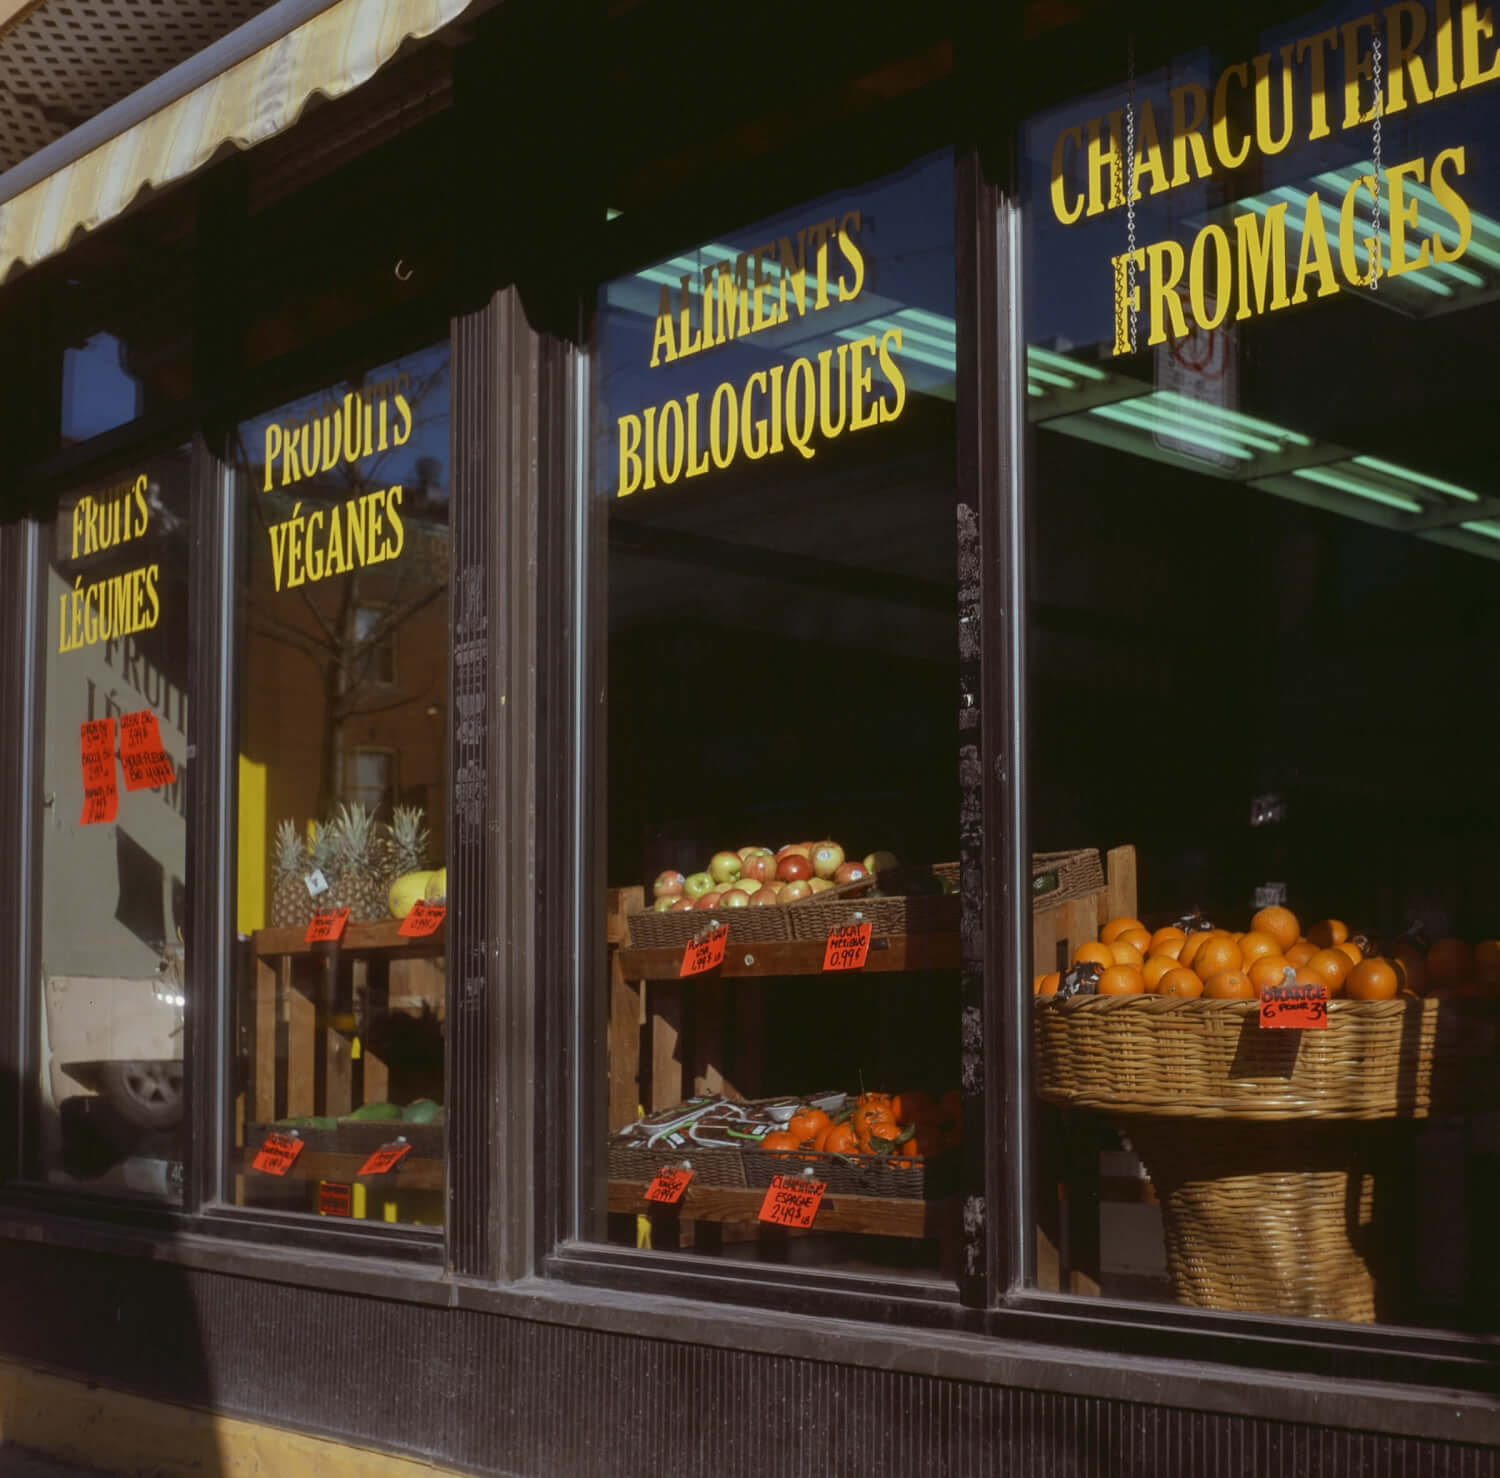 Image of a storefront in sunlight, with fruits on display in the window. 